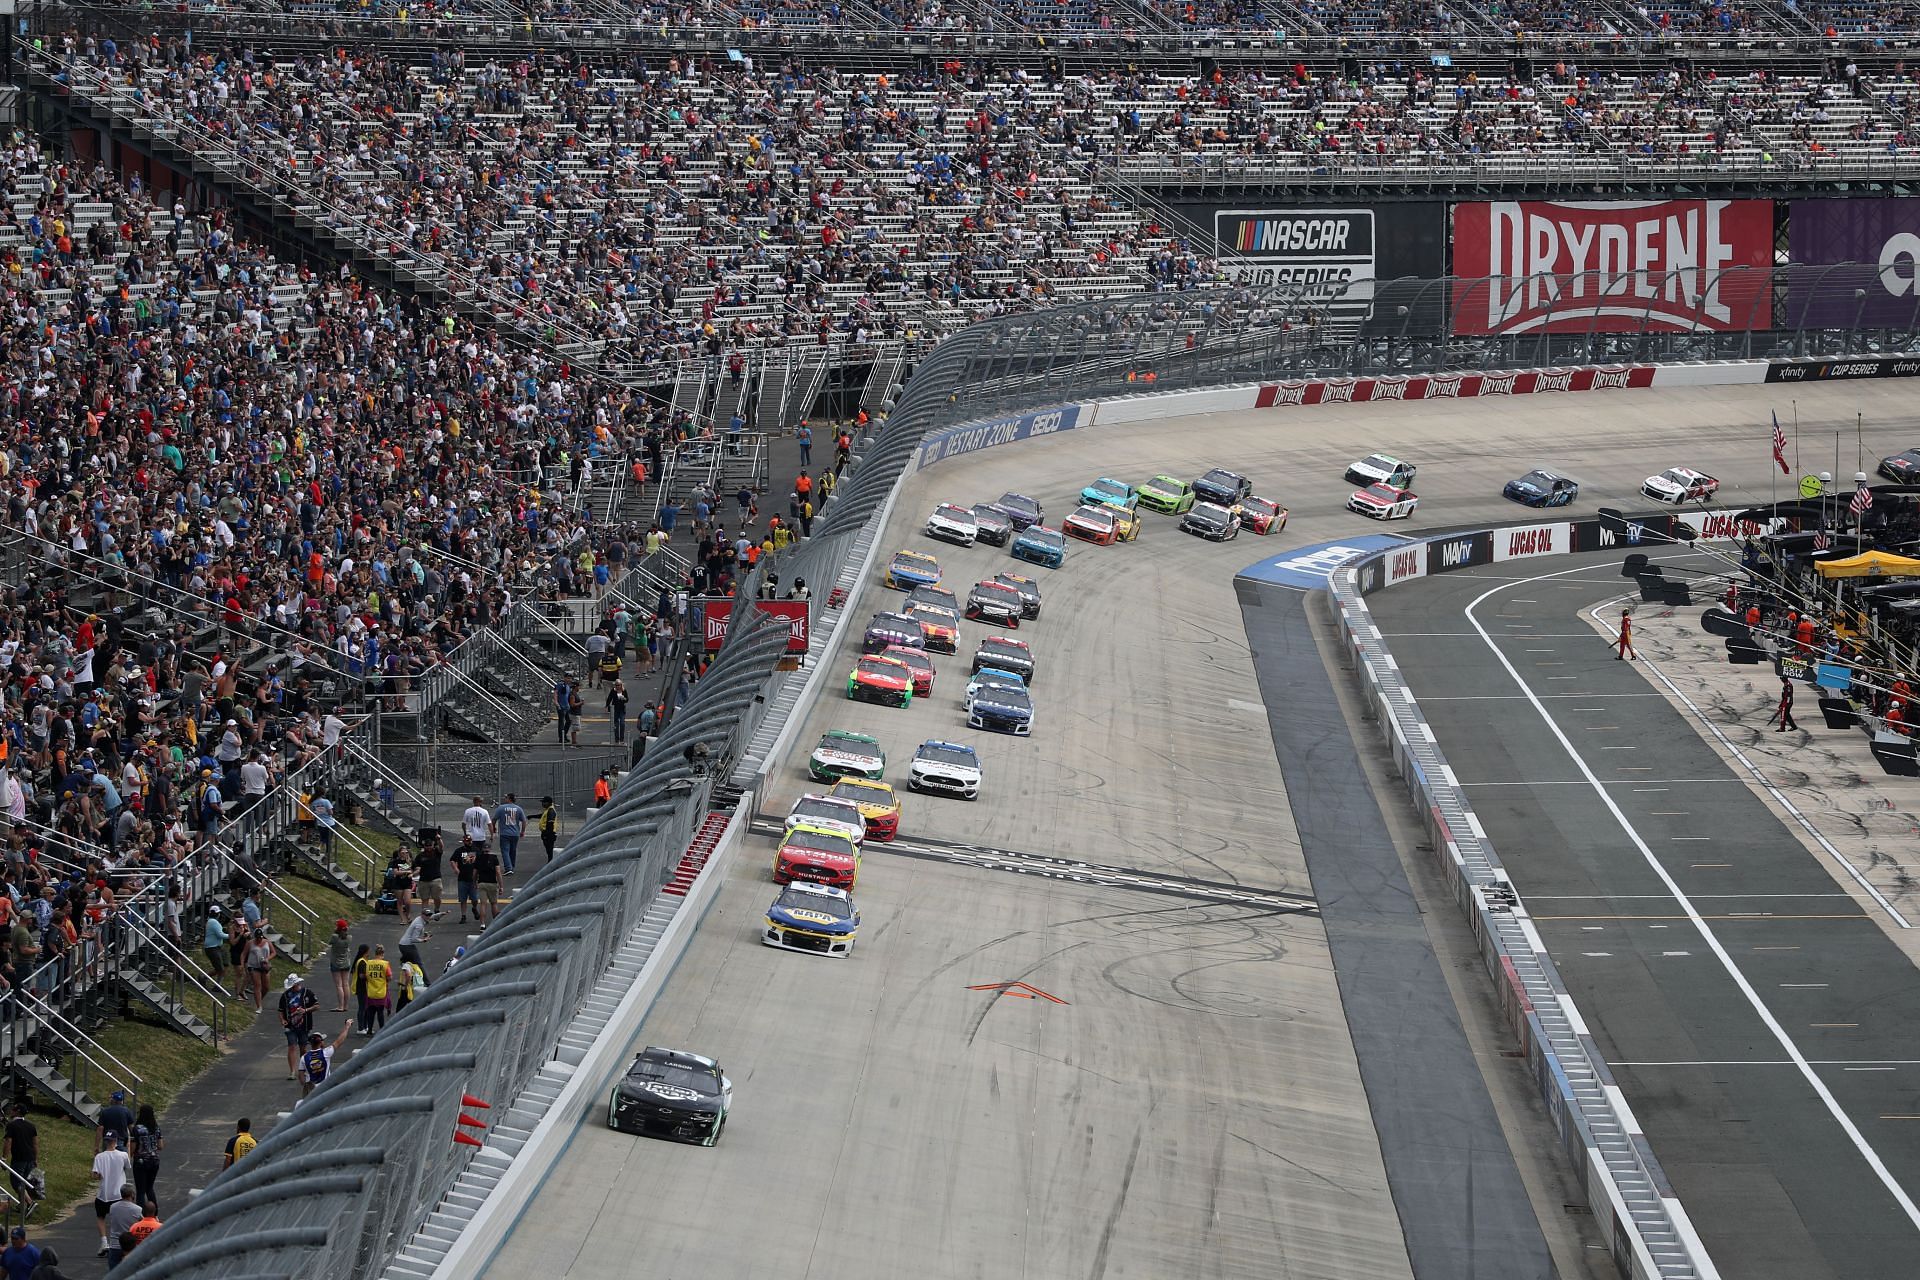 NASCAR 2022 at Dover Where to watch DuraMAX Drydene 400 at Dover Motor Superspeedway? Streaming information and more